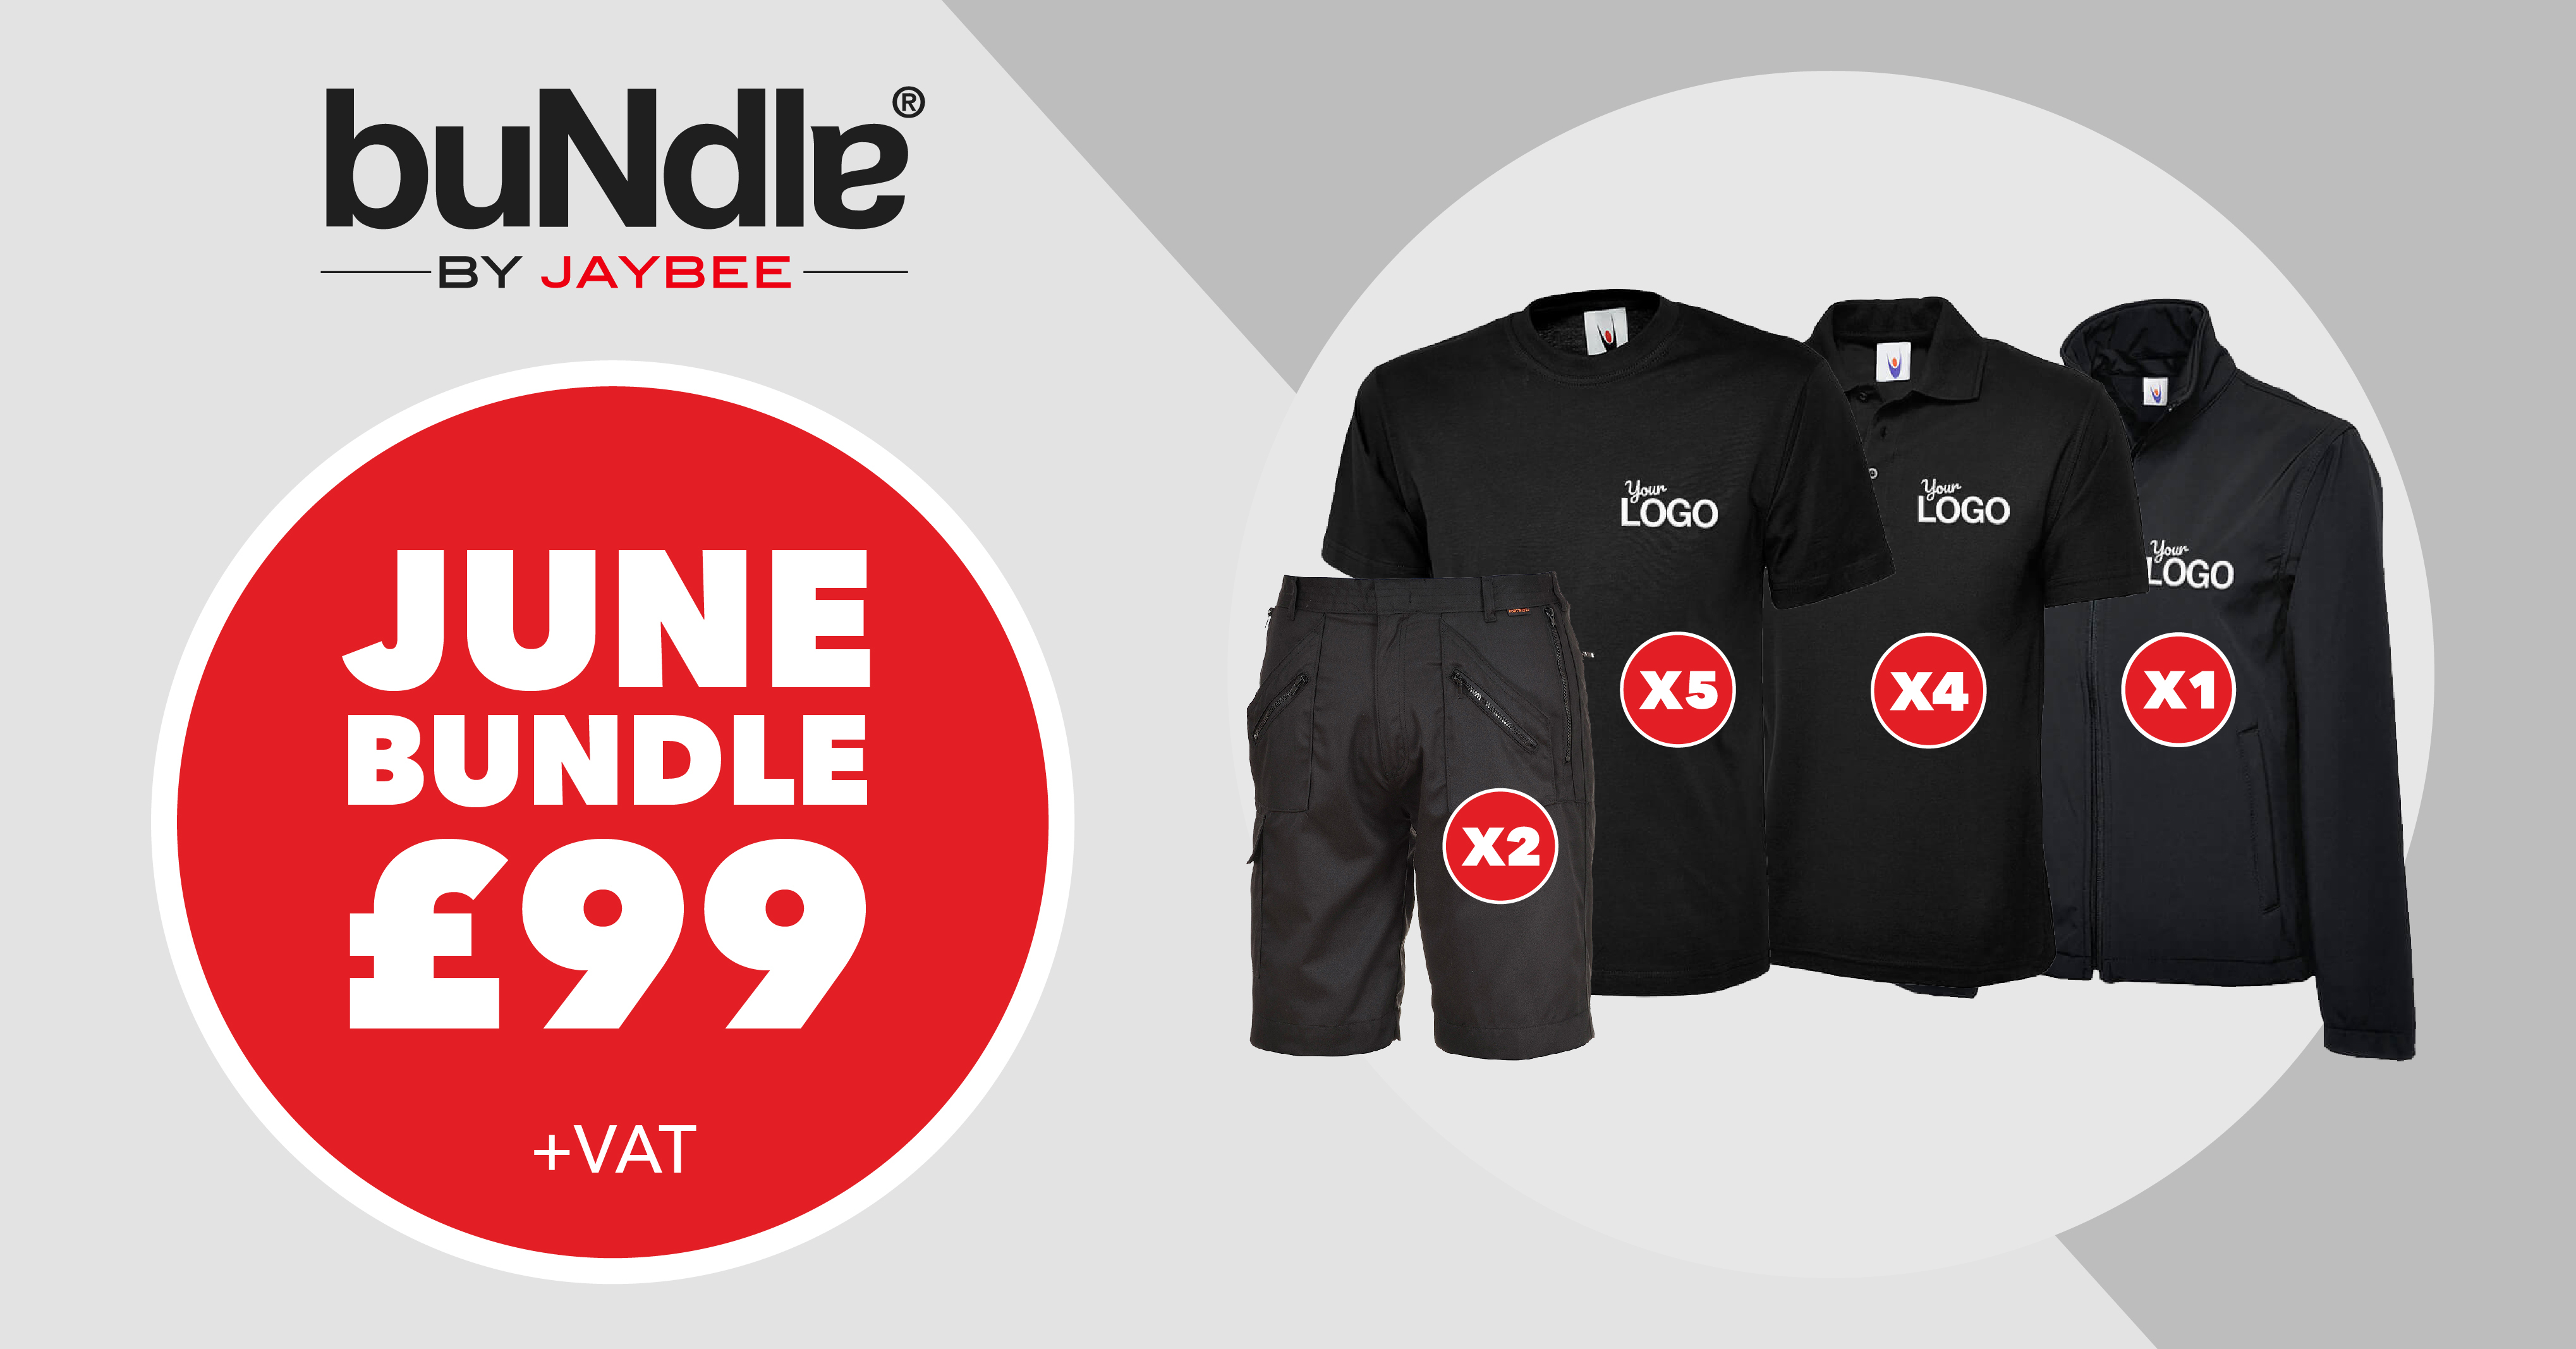 Bundle By Jaybee - Quality workwear at the right price.